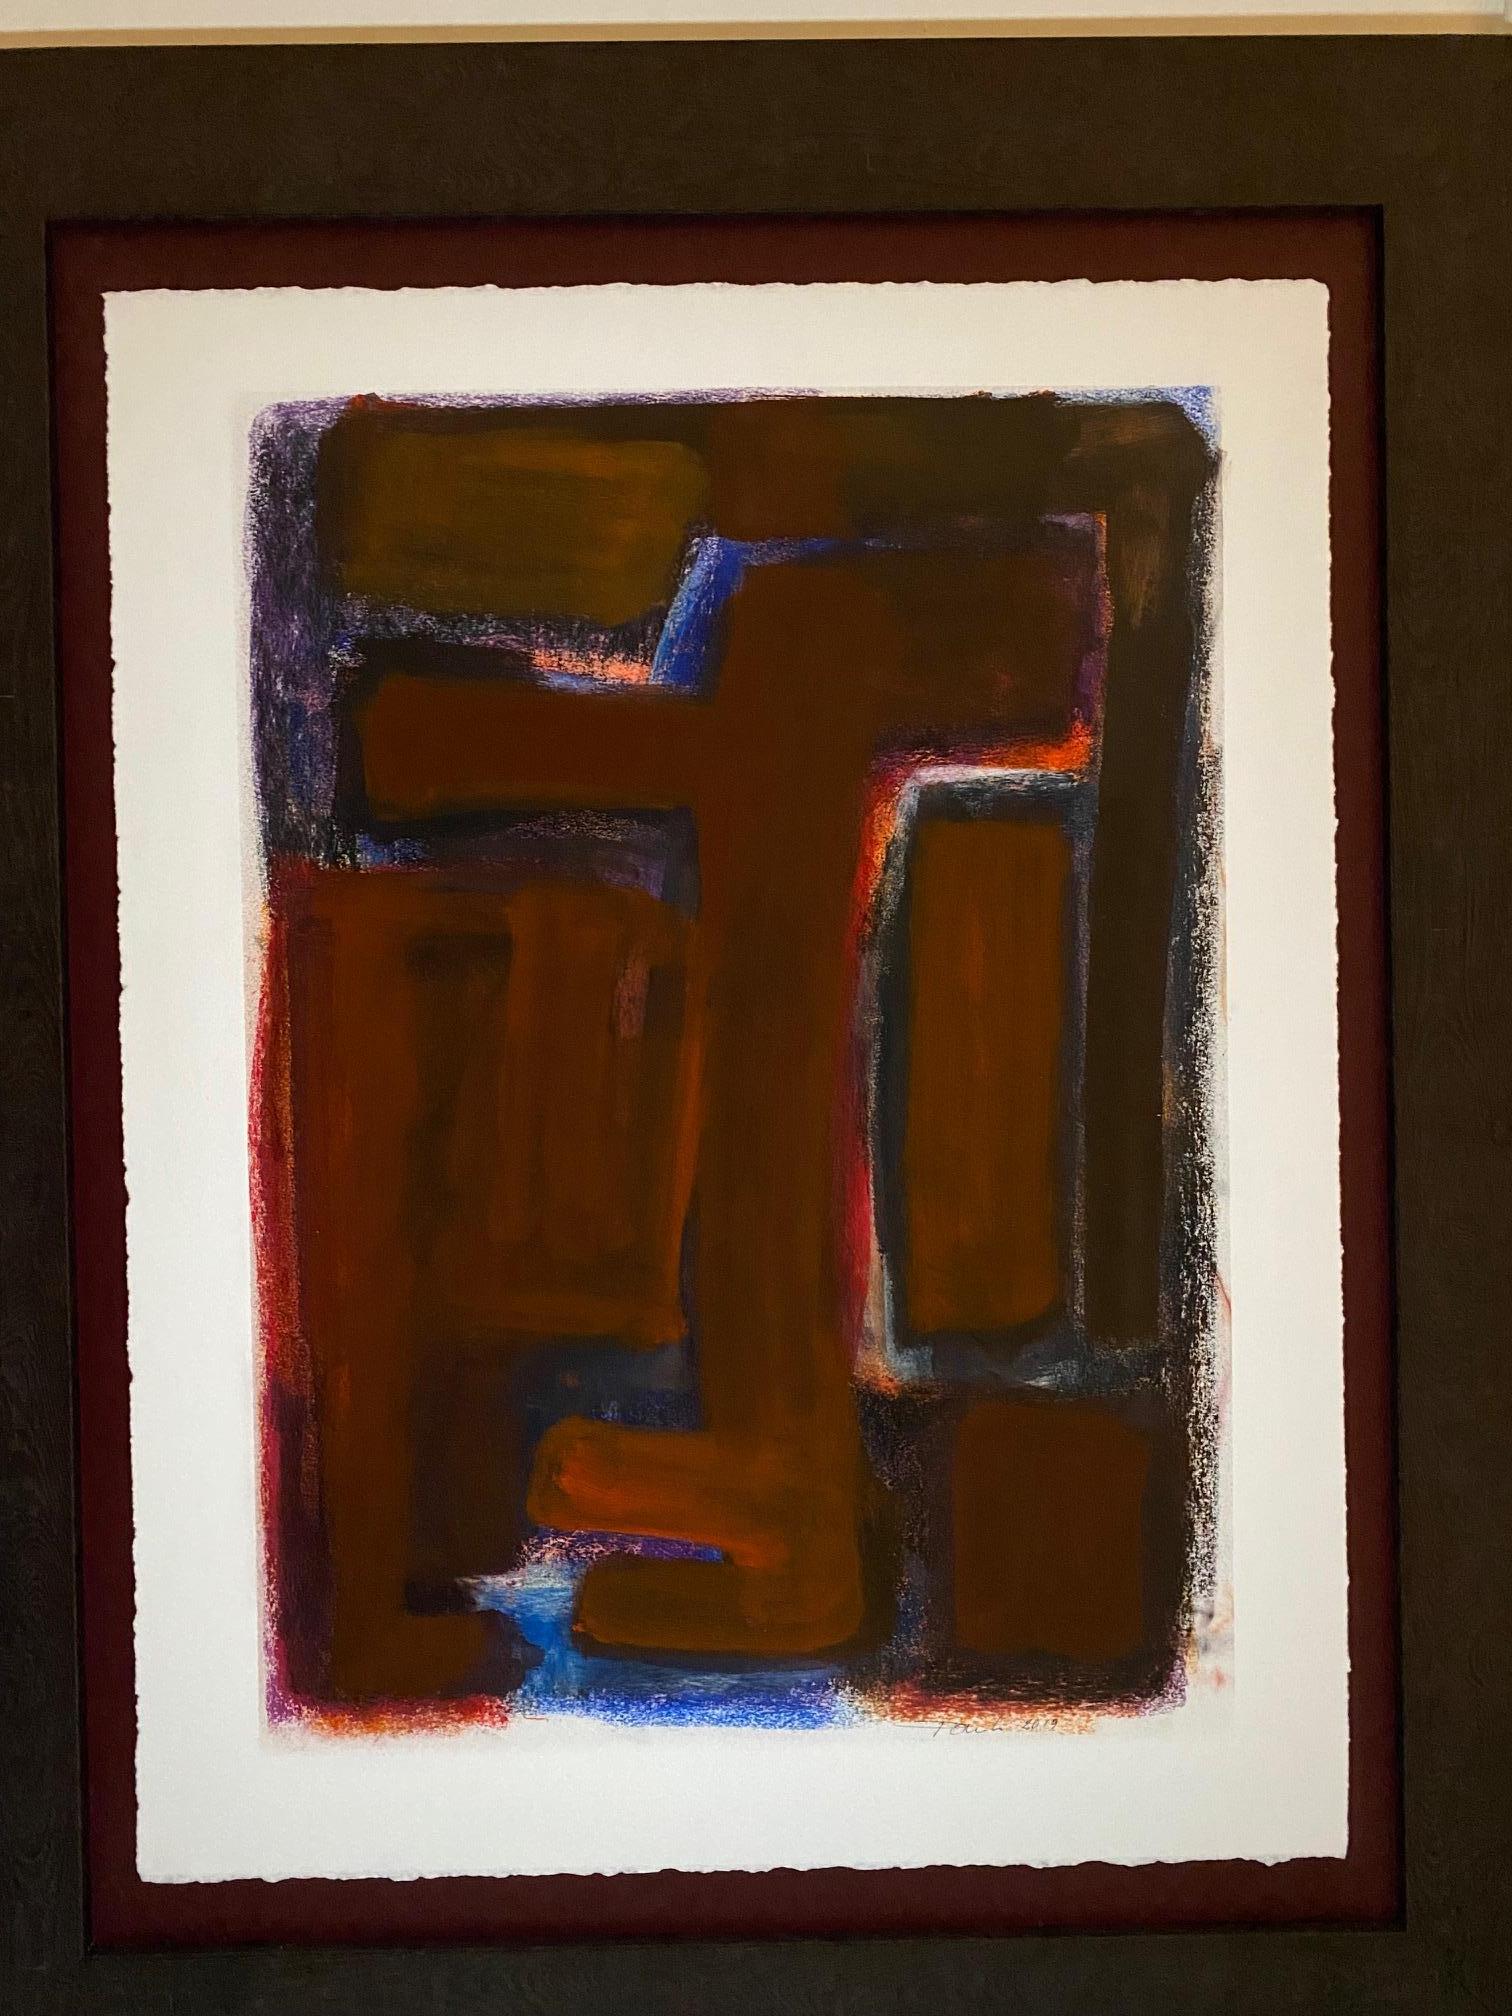 Work on paper laminated and framed; Brown wooden frame, total size with frame; 84x68x2 cm 

Born in 1944 in the canton of Fribourg, Gilbert Pauli currently lives in Geneva, where he devotes himself to painting and sculpture, a passion he developed